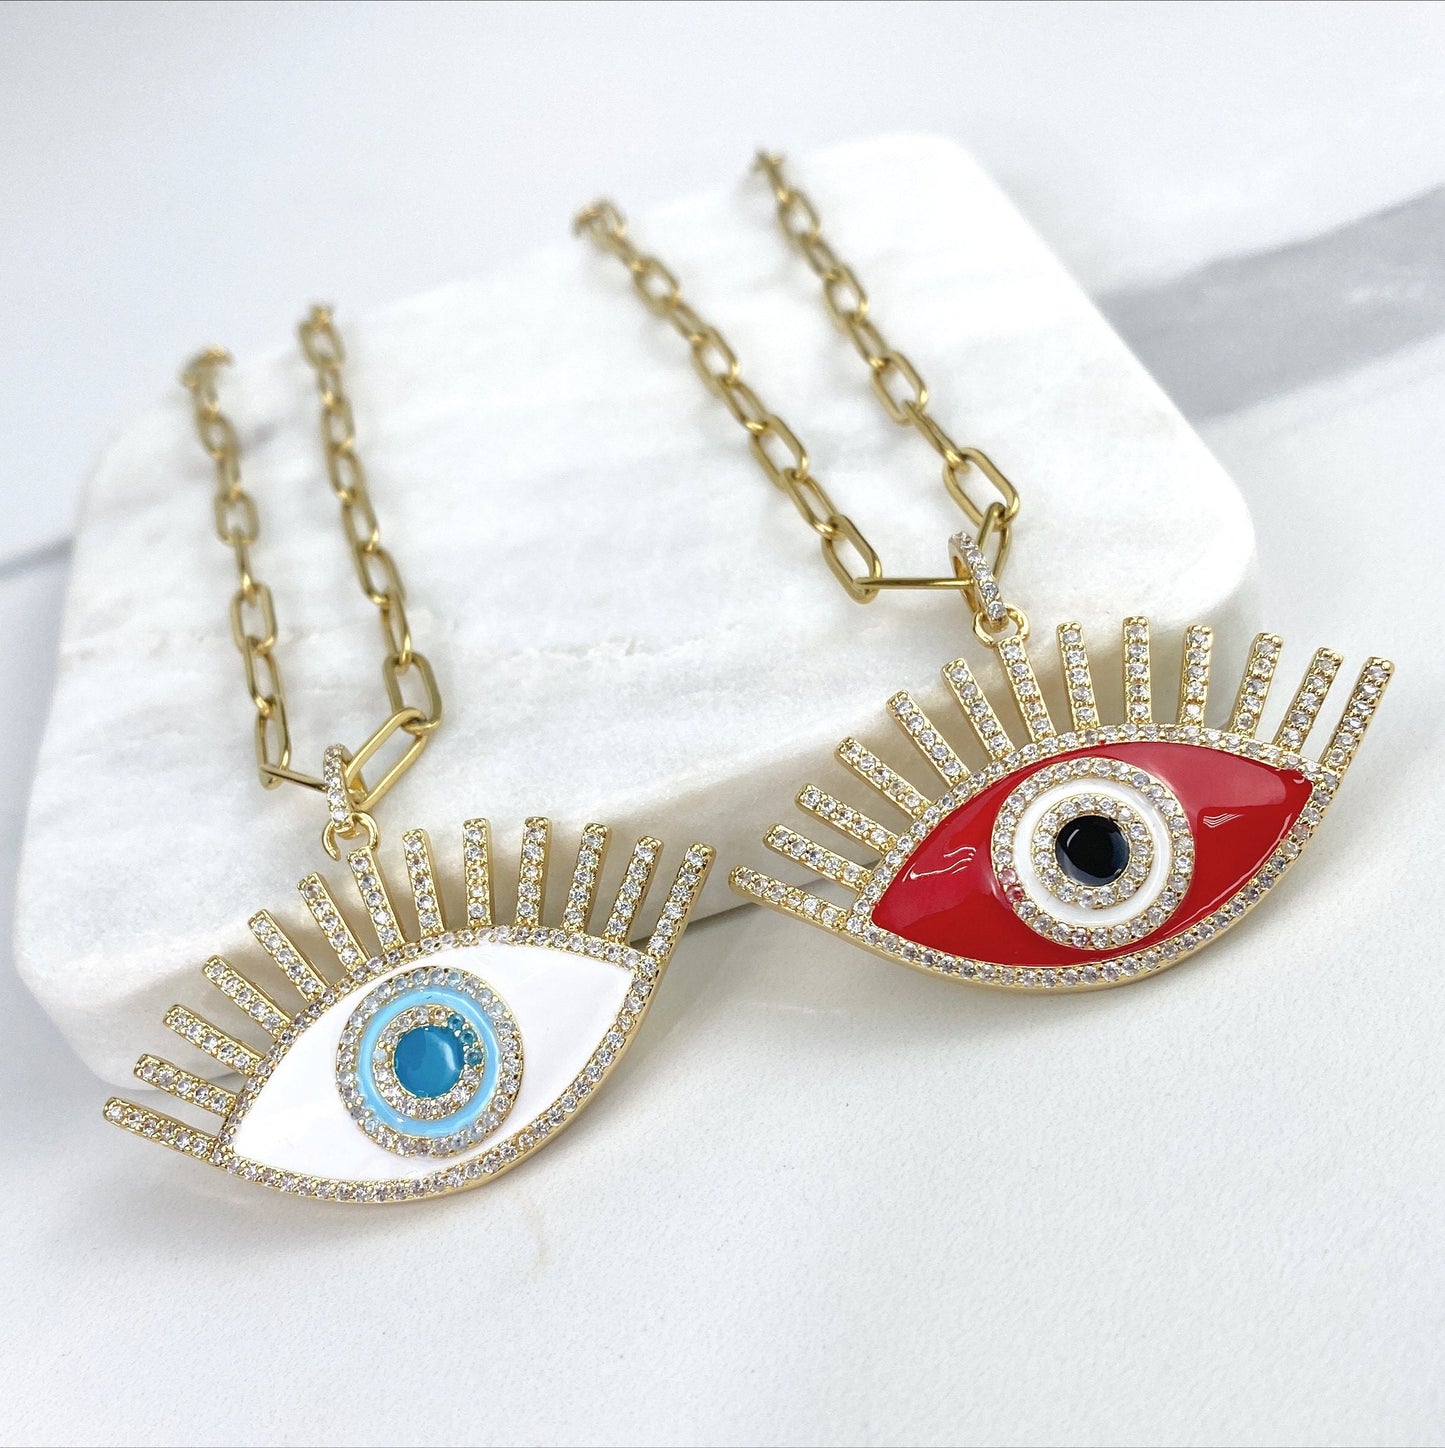 Gold Plated On Stainless Steel 4mm Paperclip Chain 16 inches with Evil Eye Charms White or Red Necklace Wholesale Jewelry Making Supplies